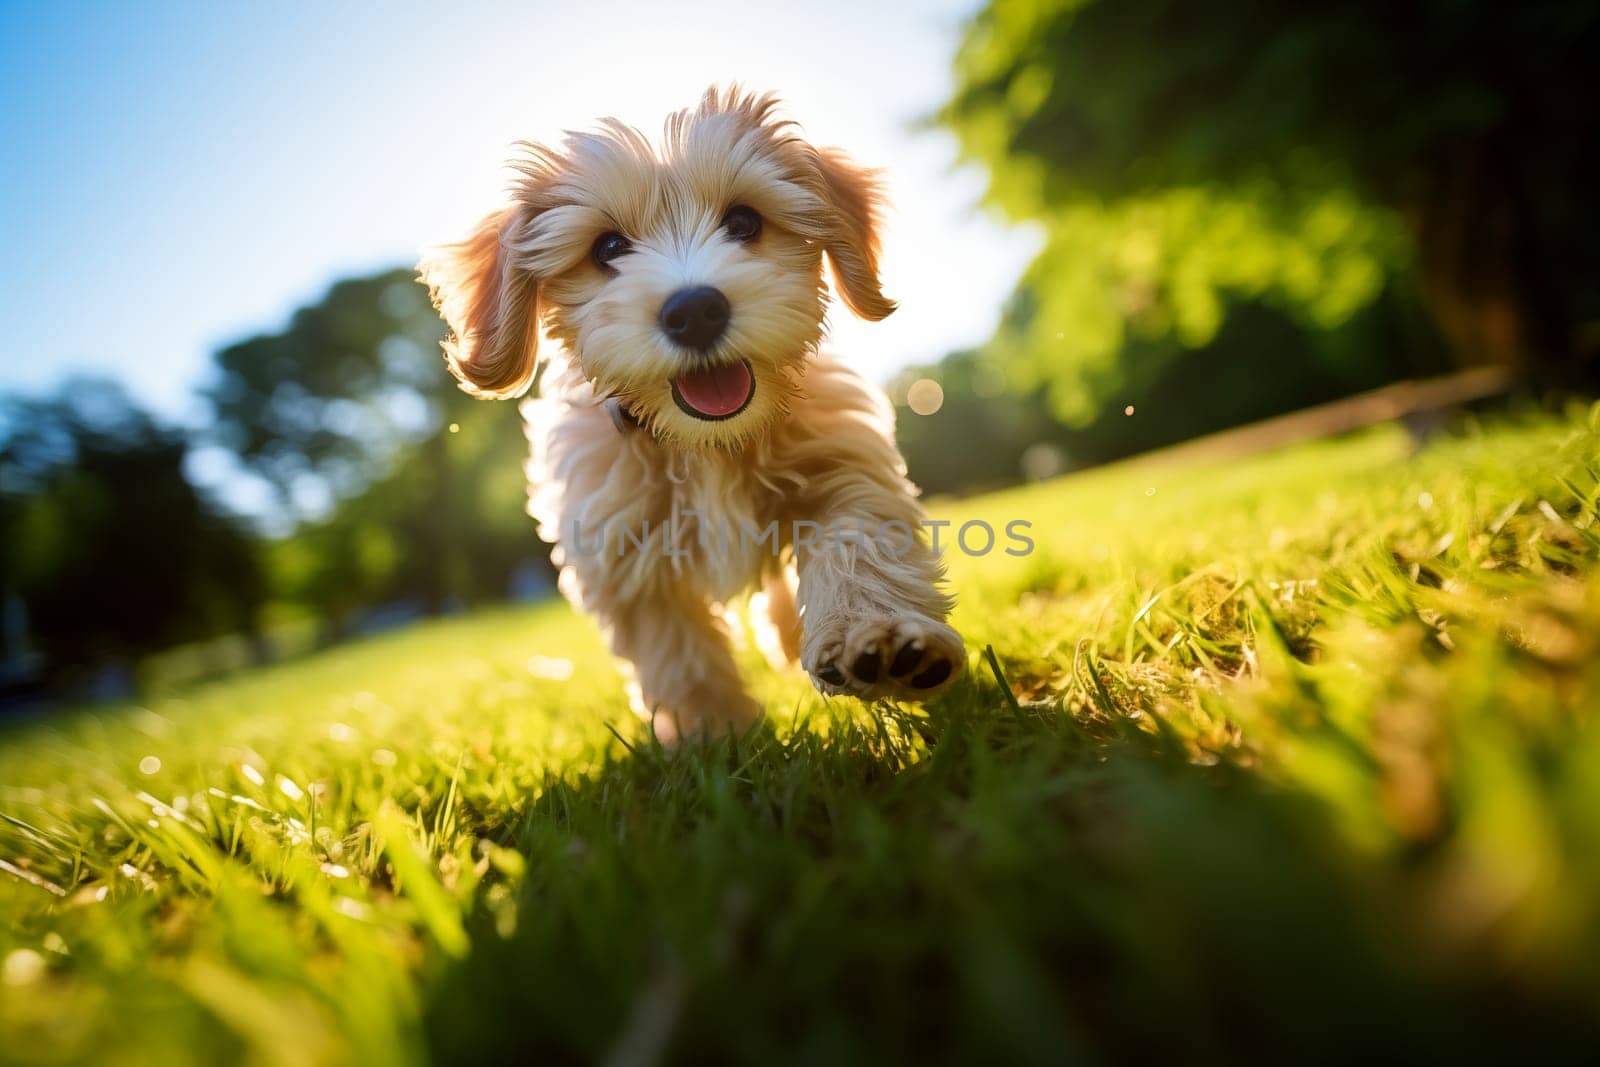 playful white puppy with fluffy fur is captured mid-run, running playing enjoying a sunny day outdoors